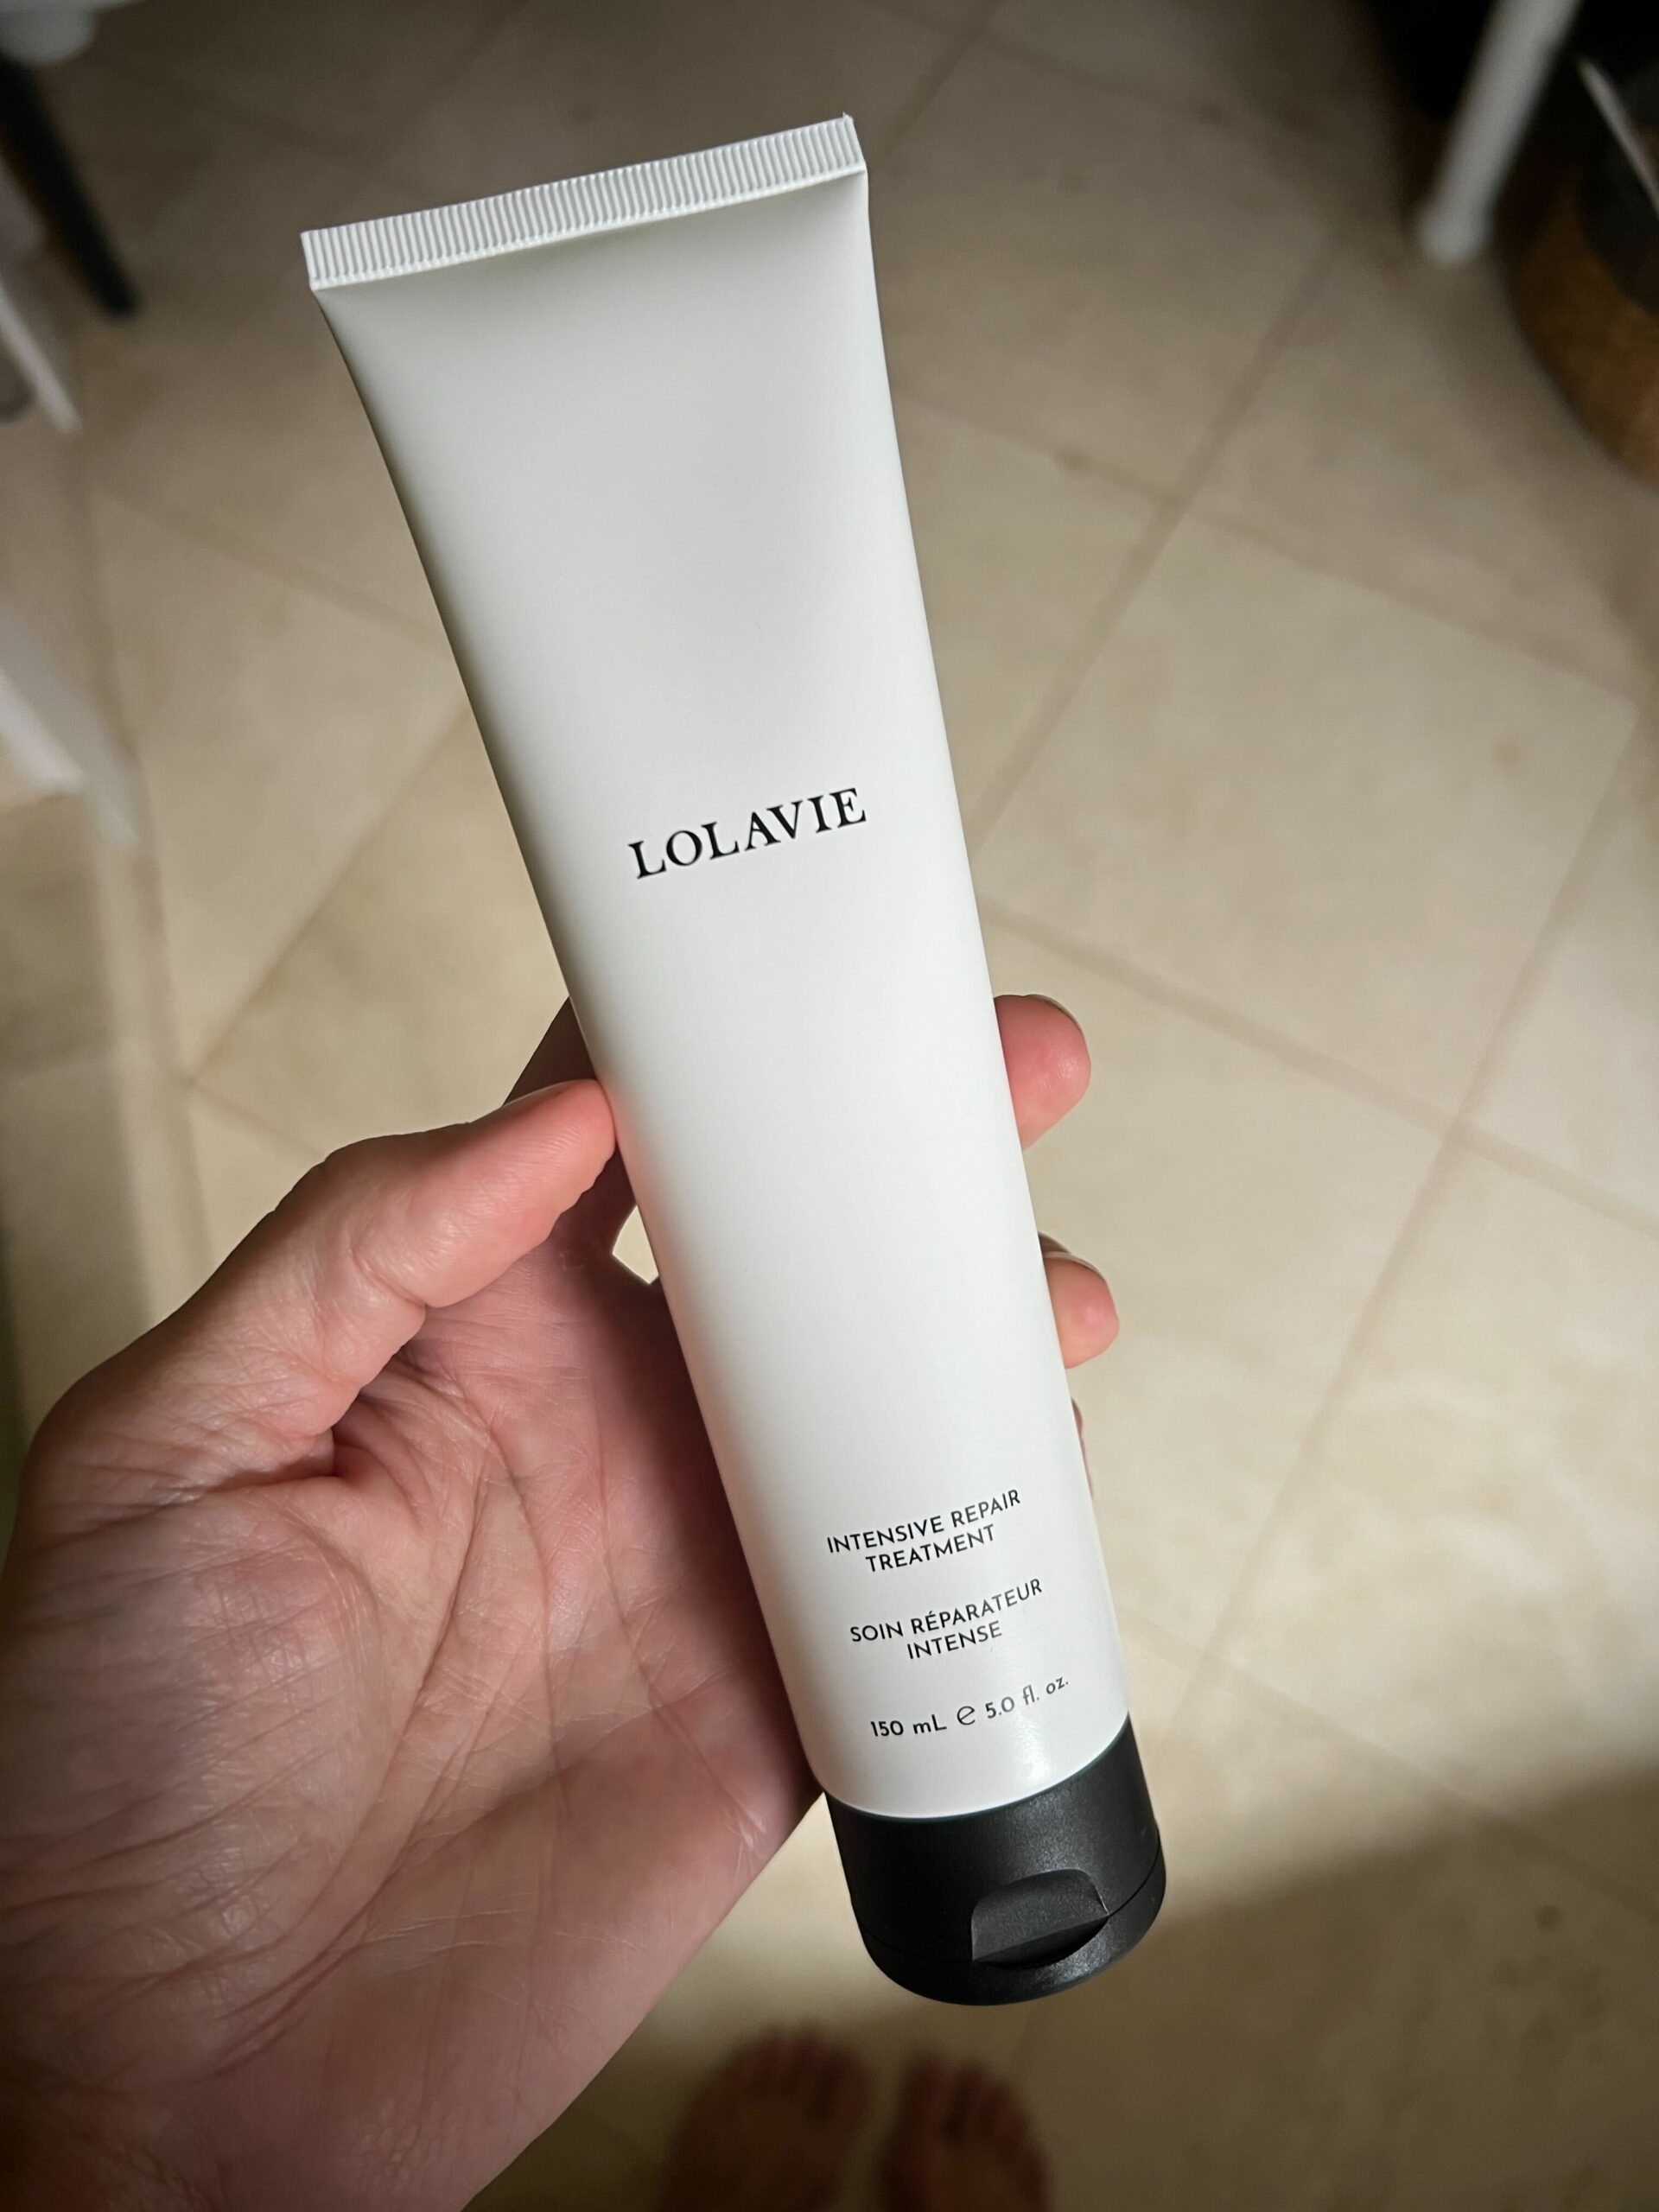 A bottle of LolaVie's Intensive Repair Treatment in a woman's hand.